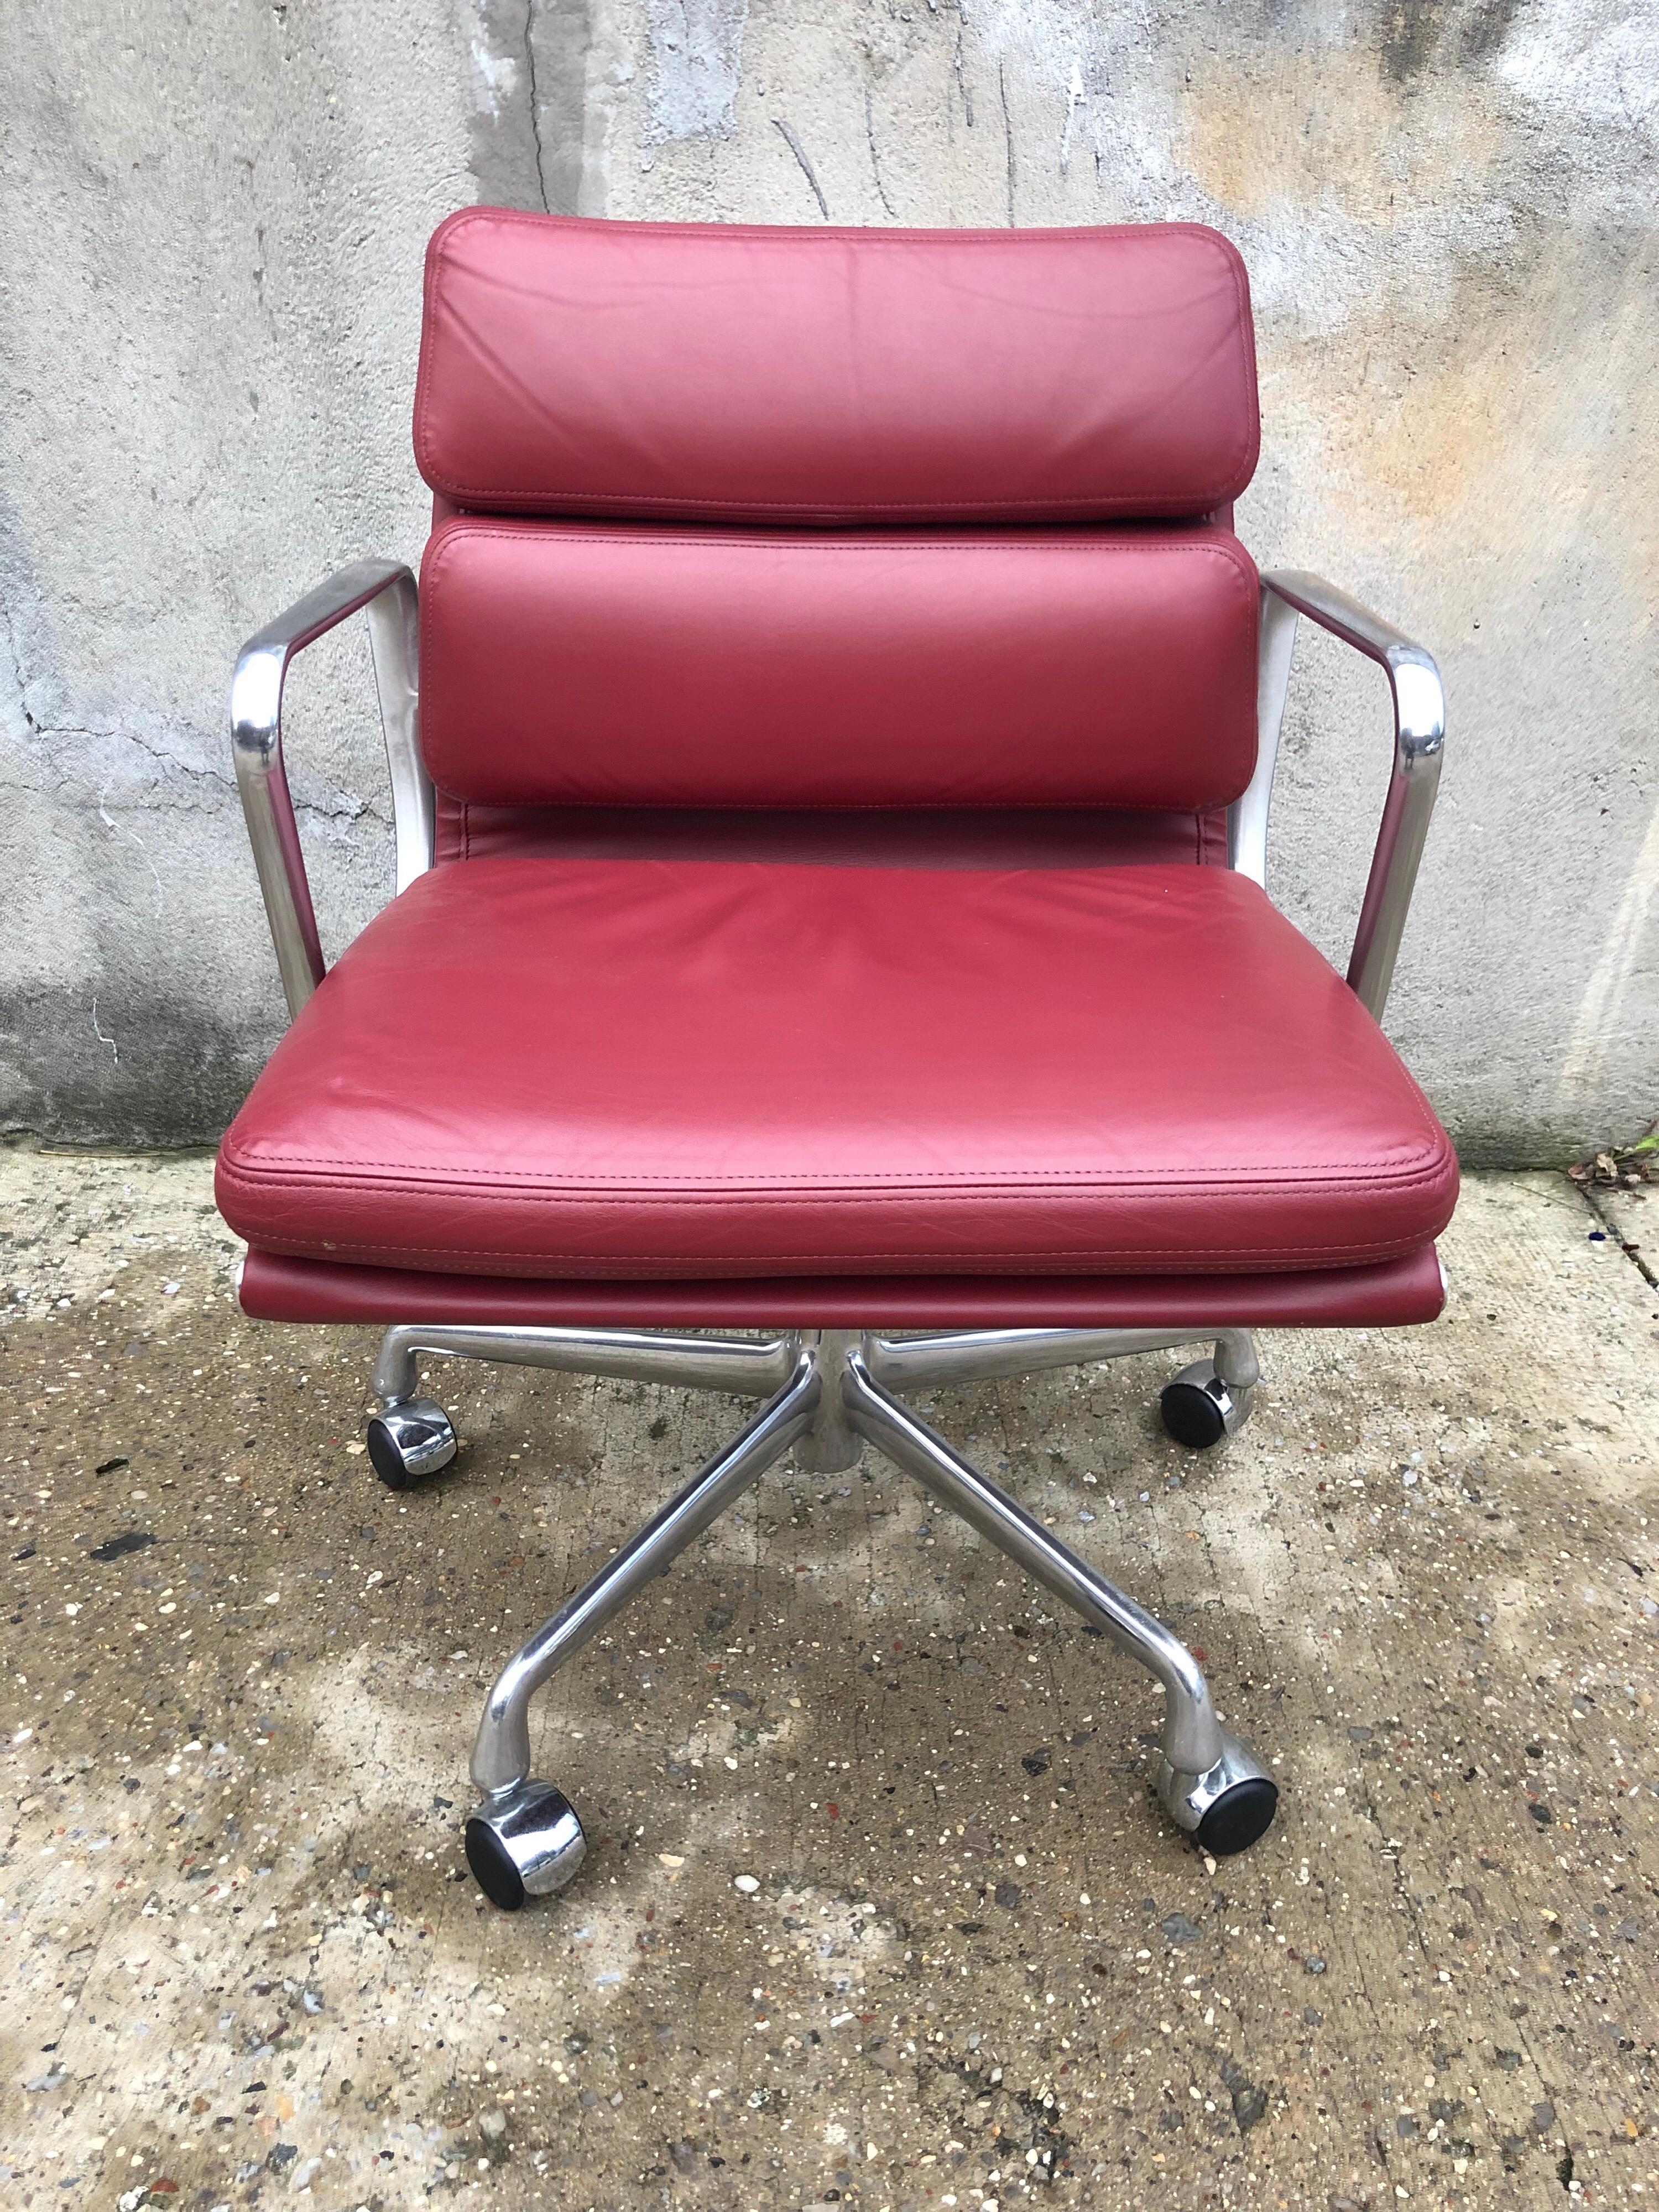 Perfect condition Herman Miller Eames soft pad management chair. Incredible leather color. Works perfectly. Signed with manufacturer’s label and tag.